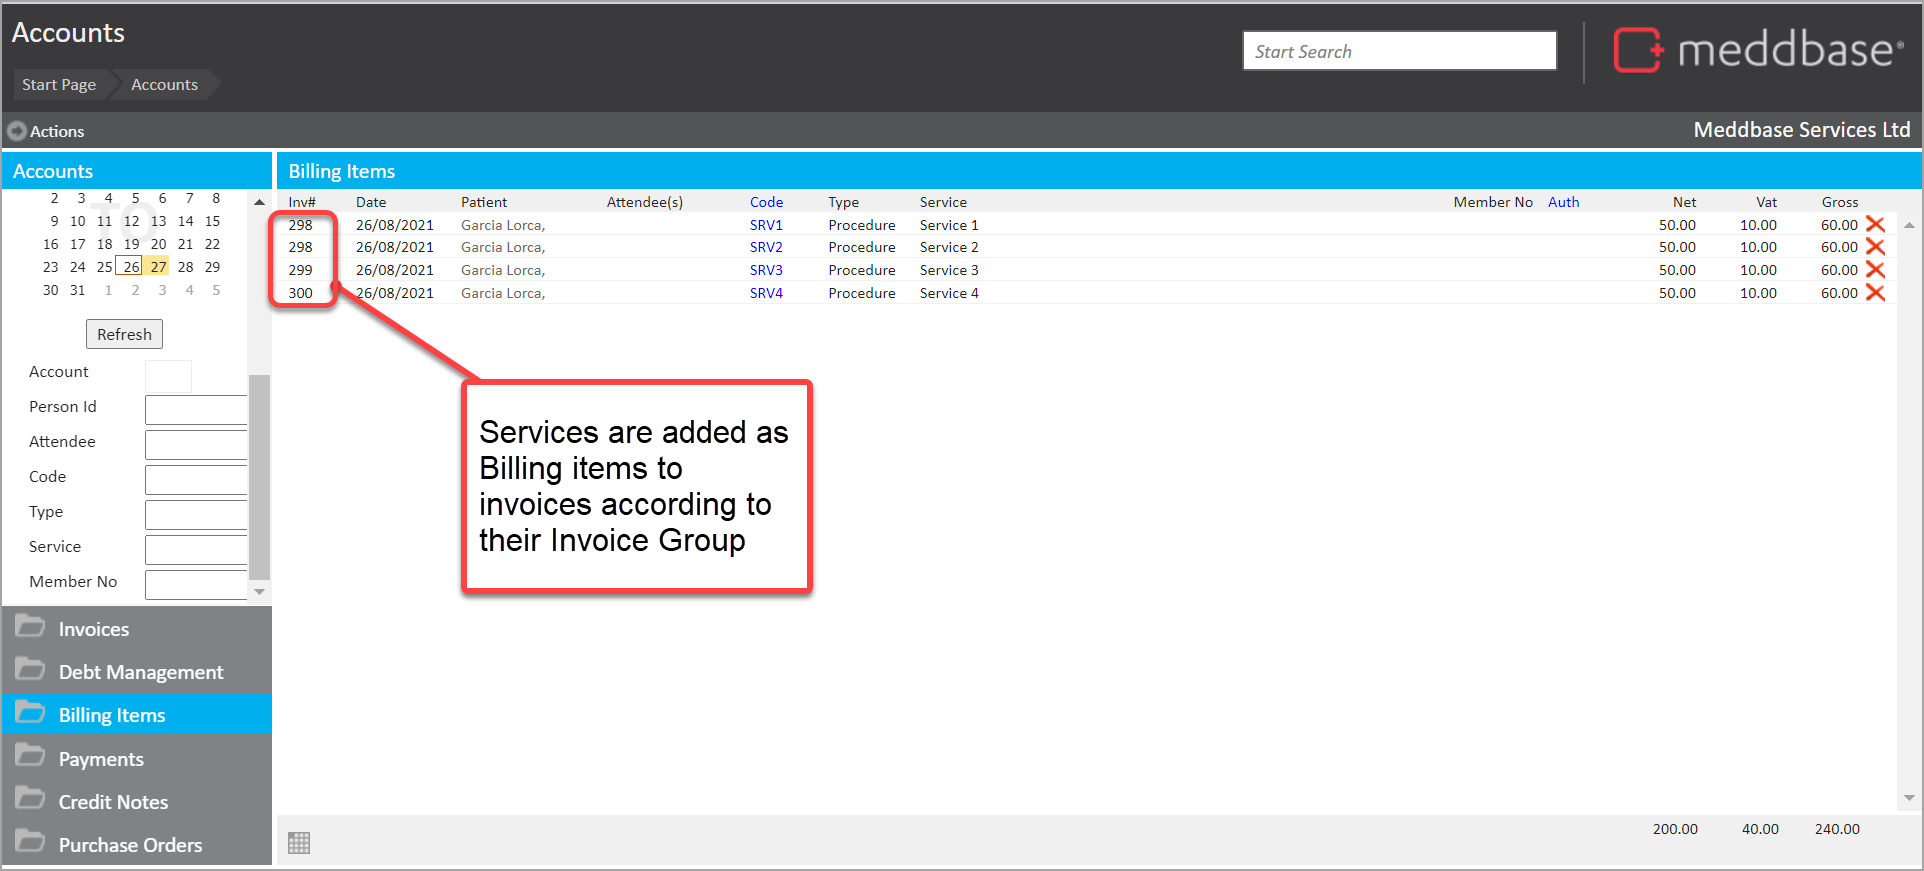 Services_added_to_invoices_as_biling_items_according_to_their_Invoice_group